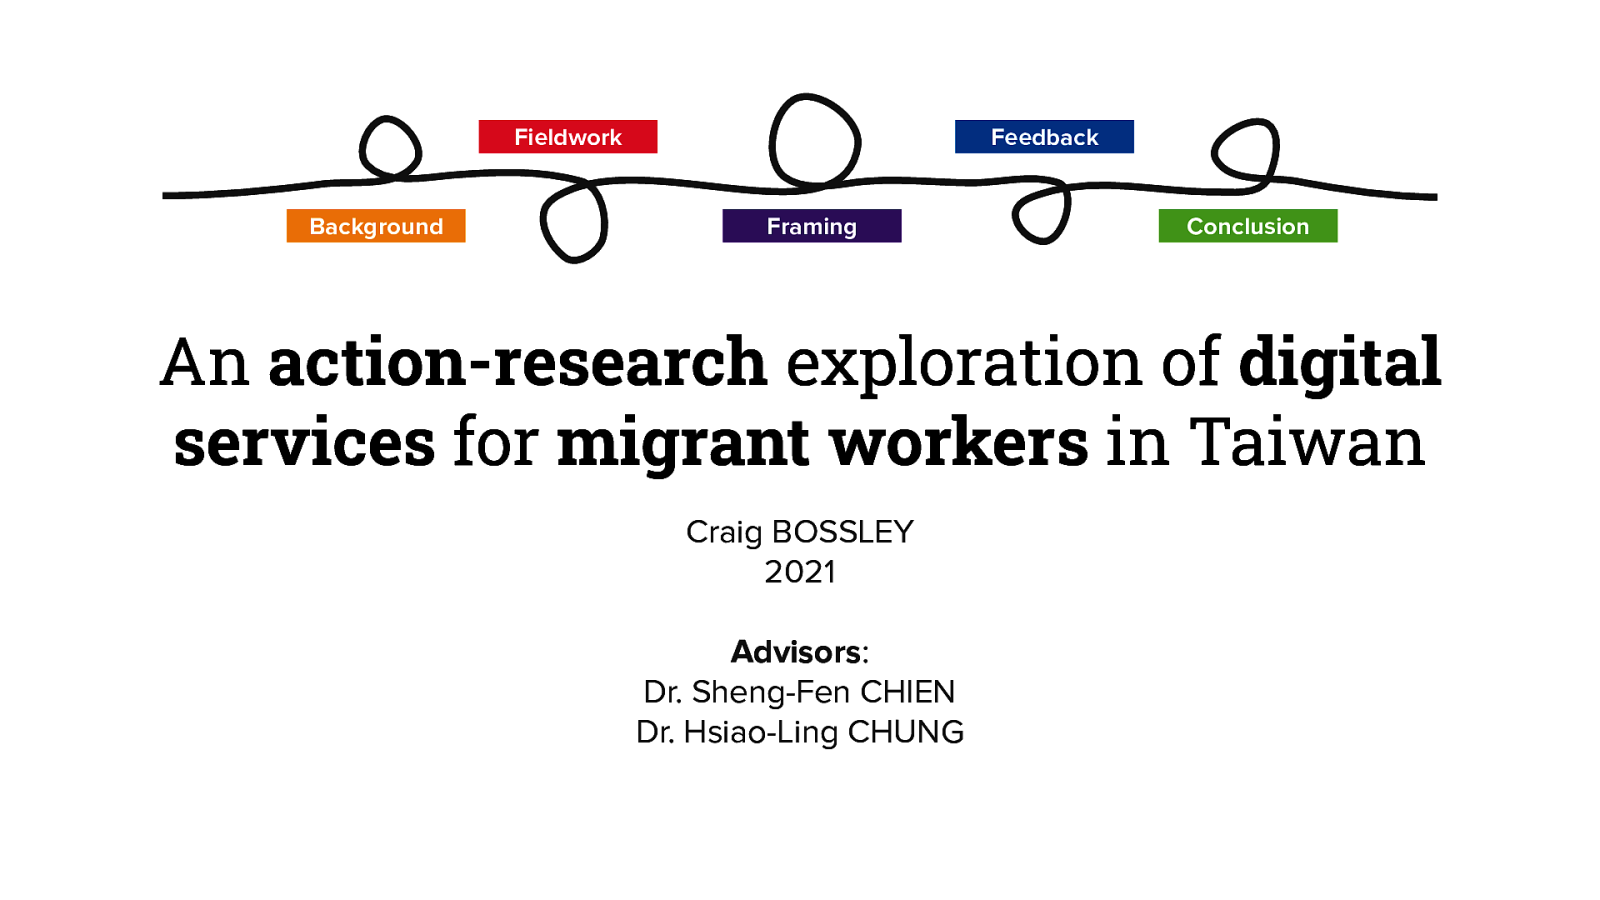 An action-research exploration of digital services for migrant workers in Taiwan